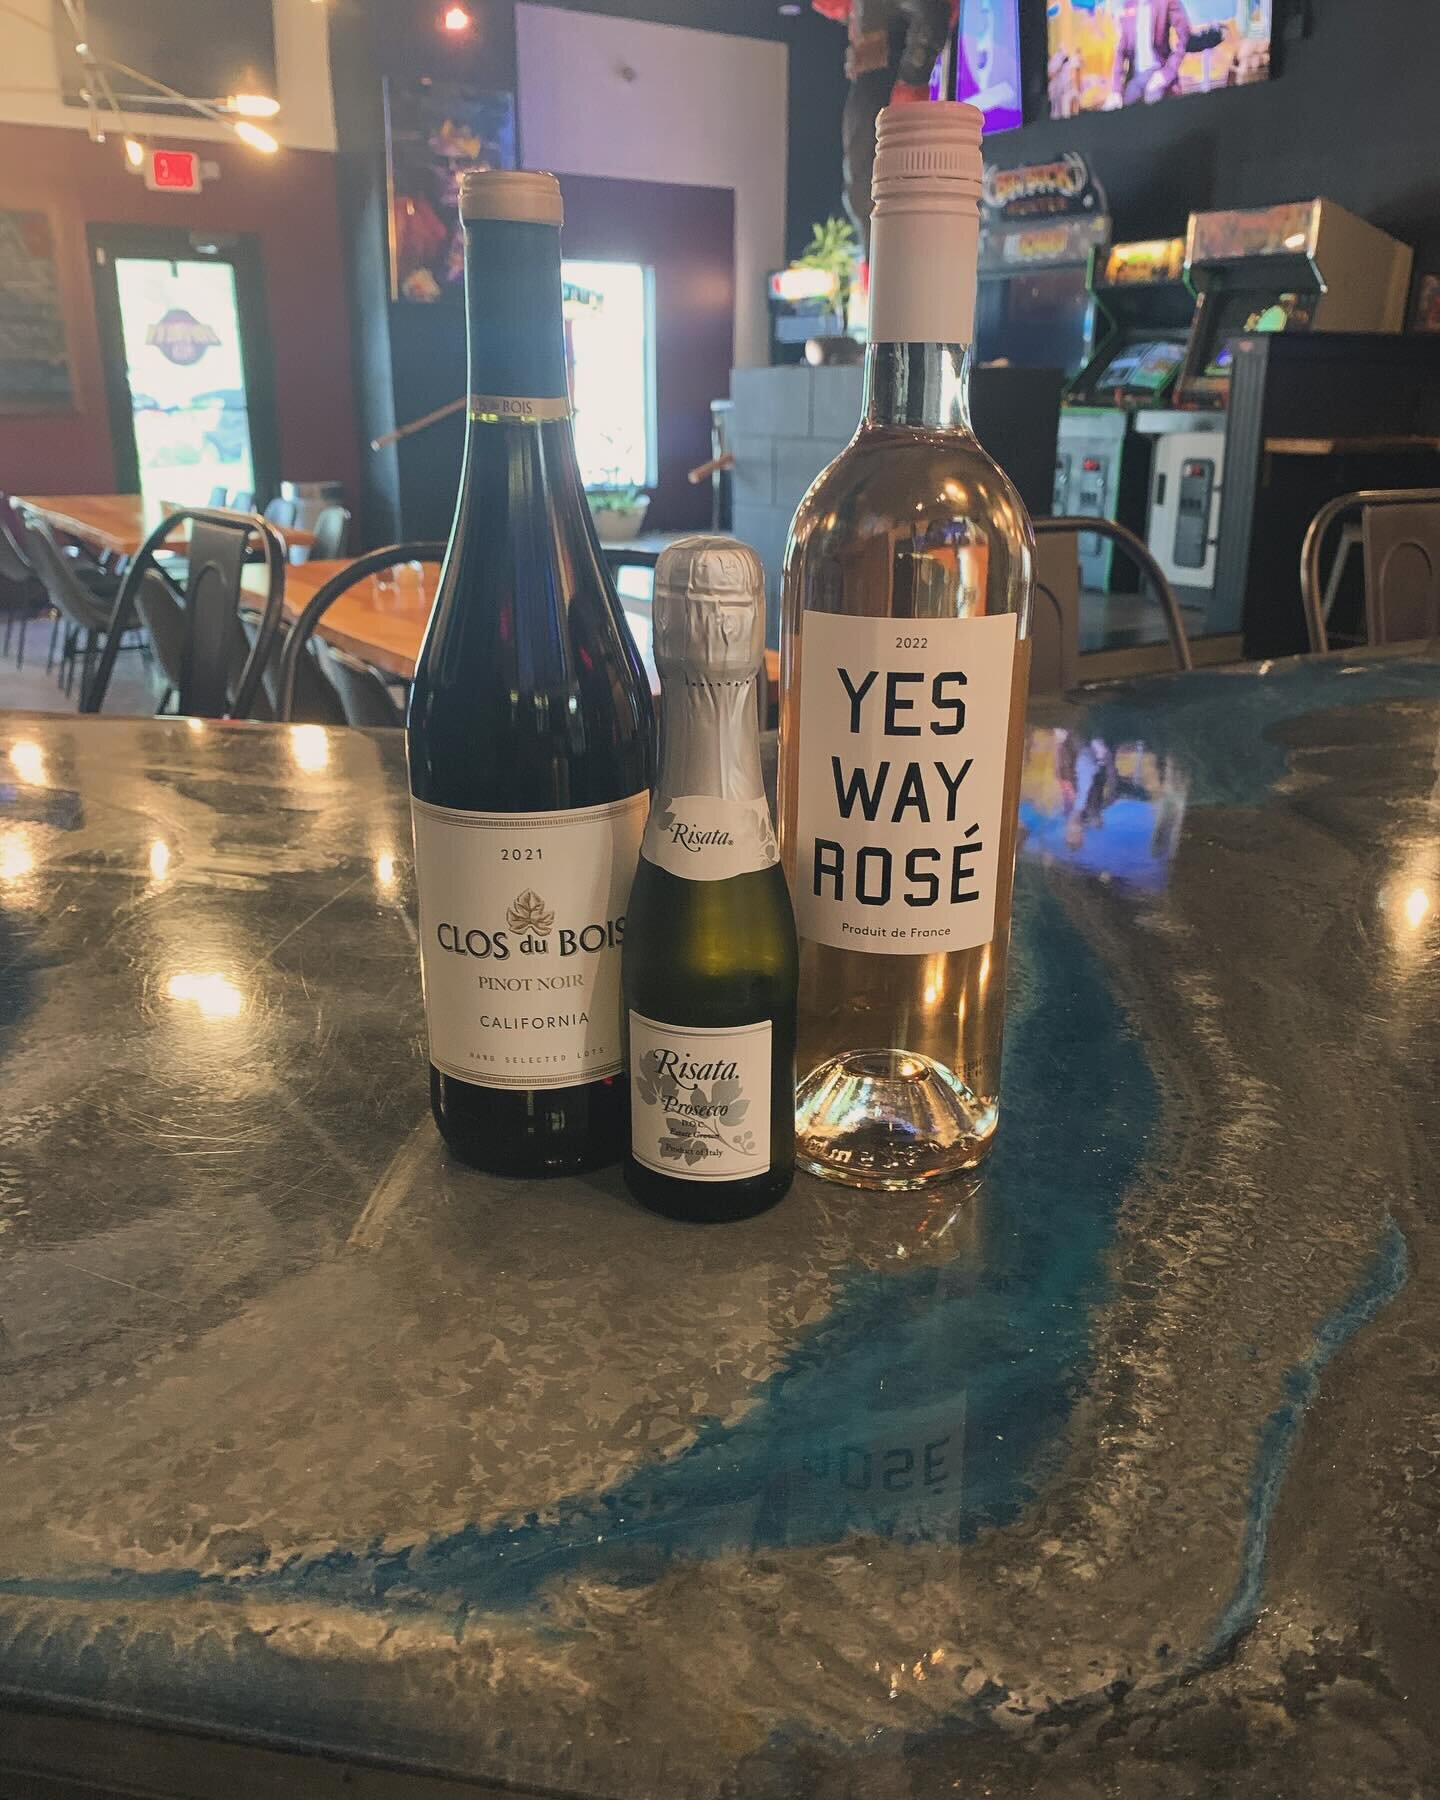 ‼️🍷 Wine Down Wednesday🍷‼️ 

It&rsquo;s hump day which means it&rsquo;s Wine Down Wednesday at your friendly neighborhood pizzeria! Come enjoy half off bottles of wine and $1 off single pours allll night long! Pair your favorite wine with our alway